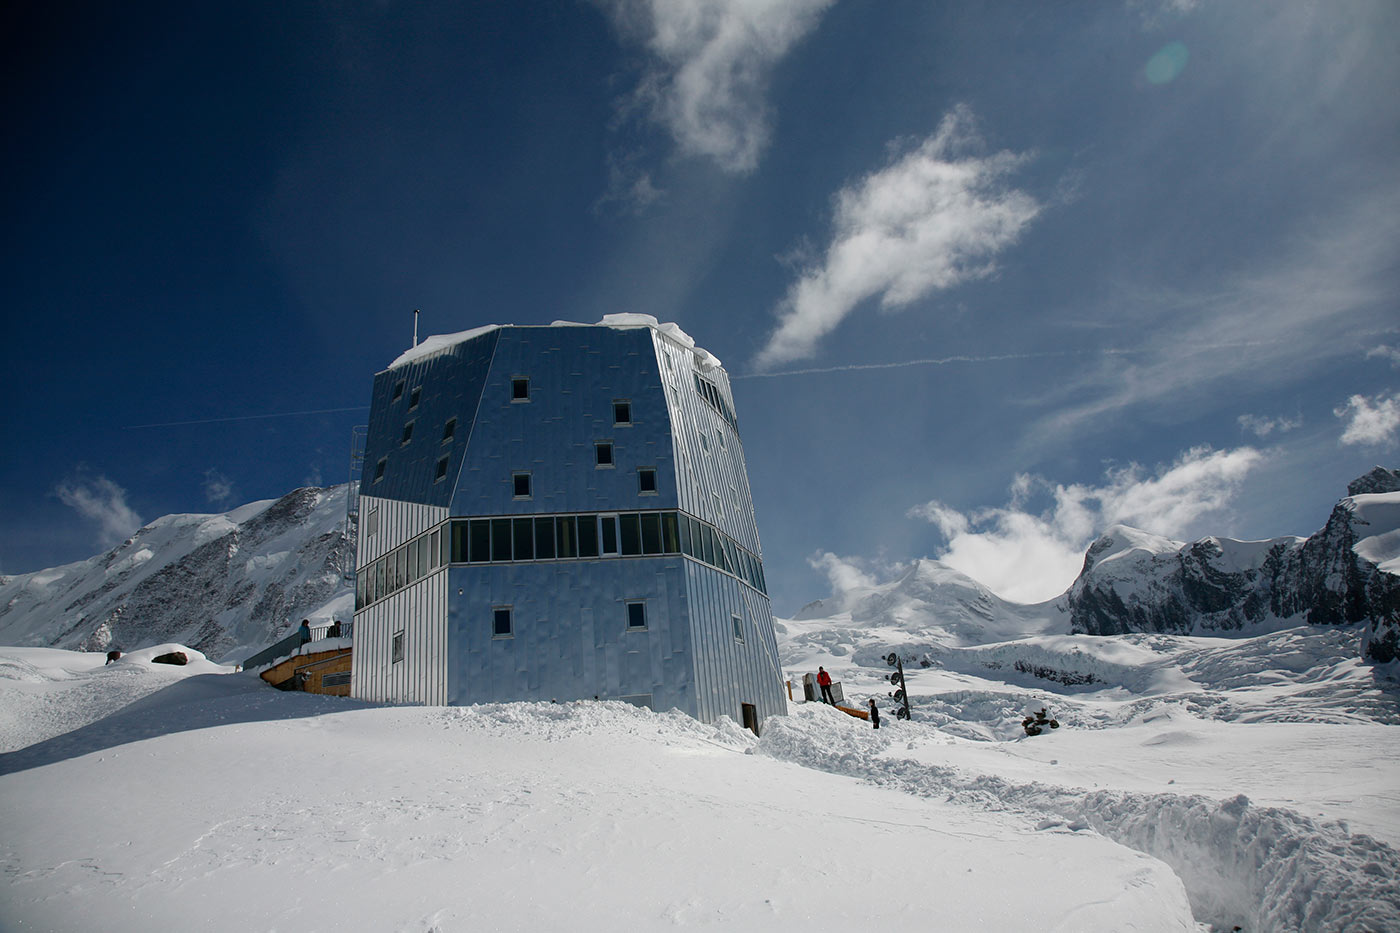 Serious mountaineering skills are required to even reach the Monte Rosa hut